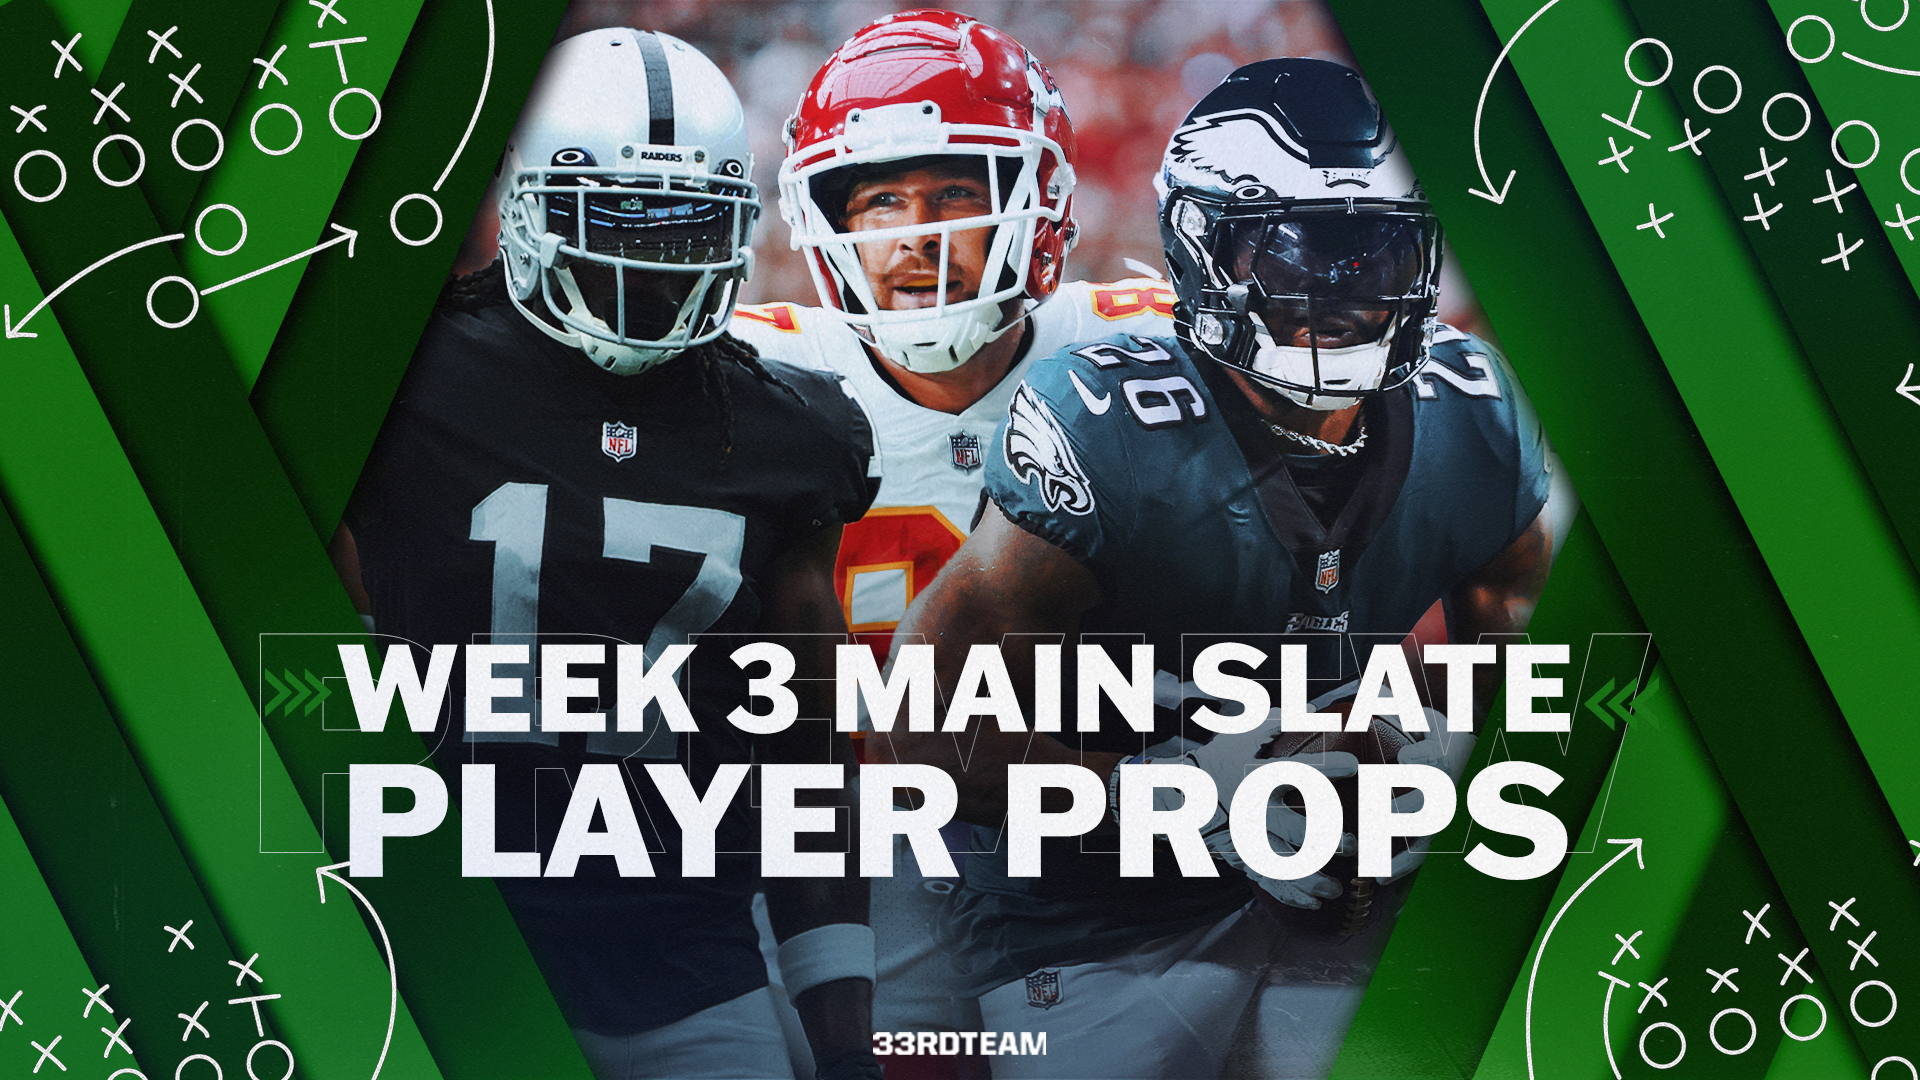 Six Player Props for Week 3